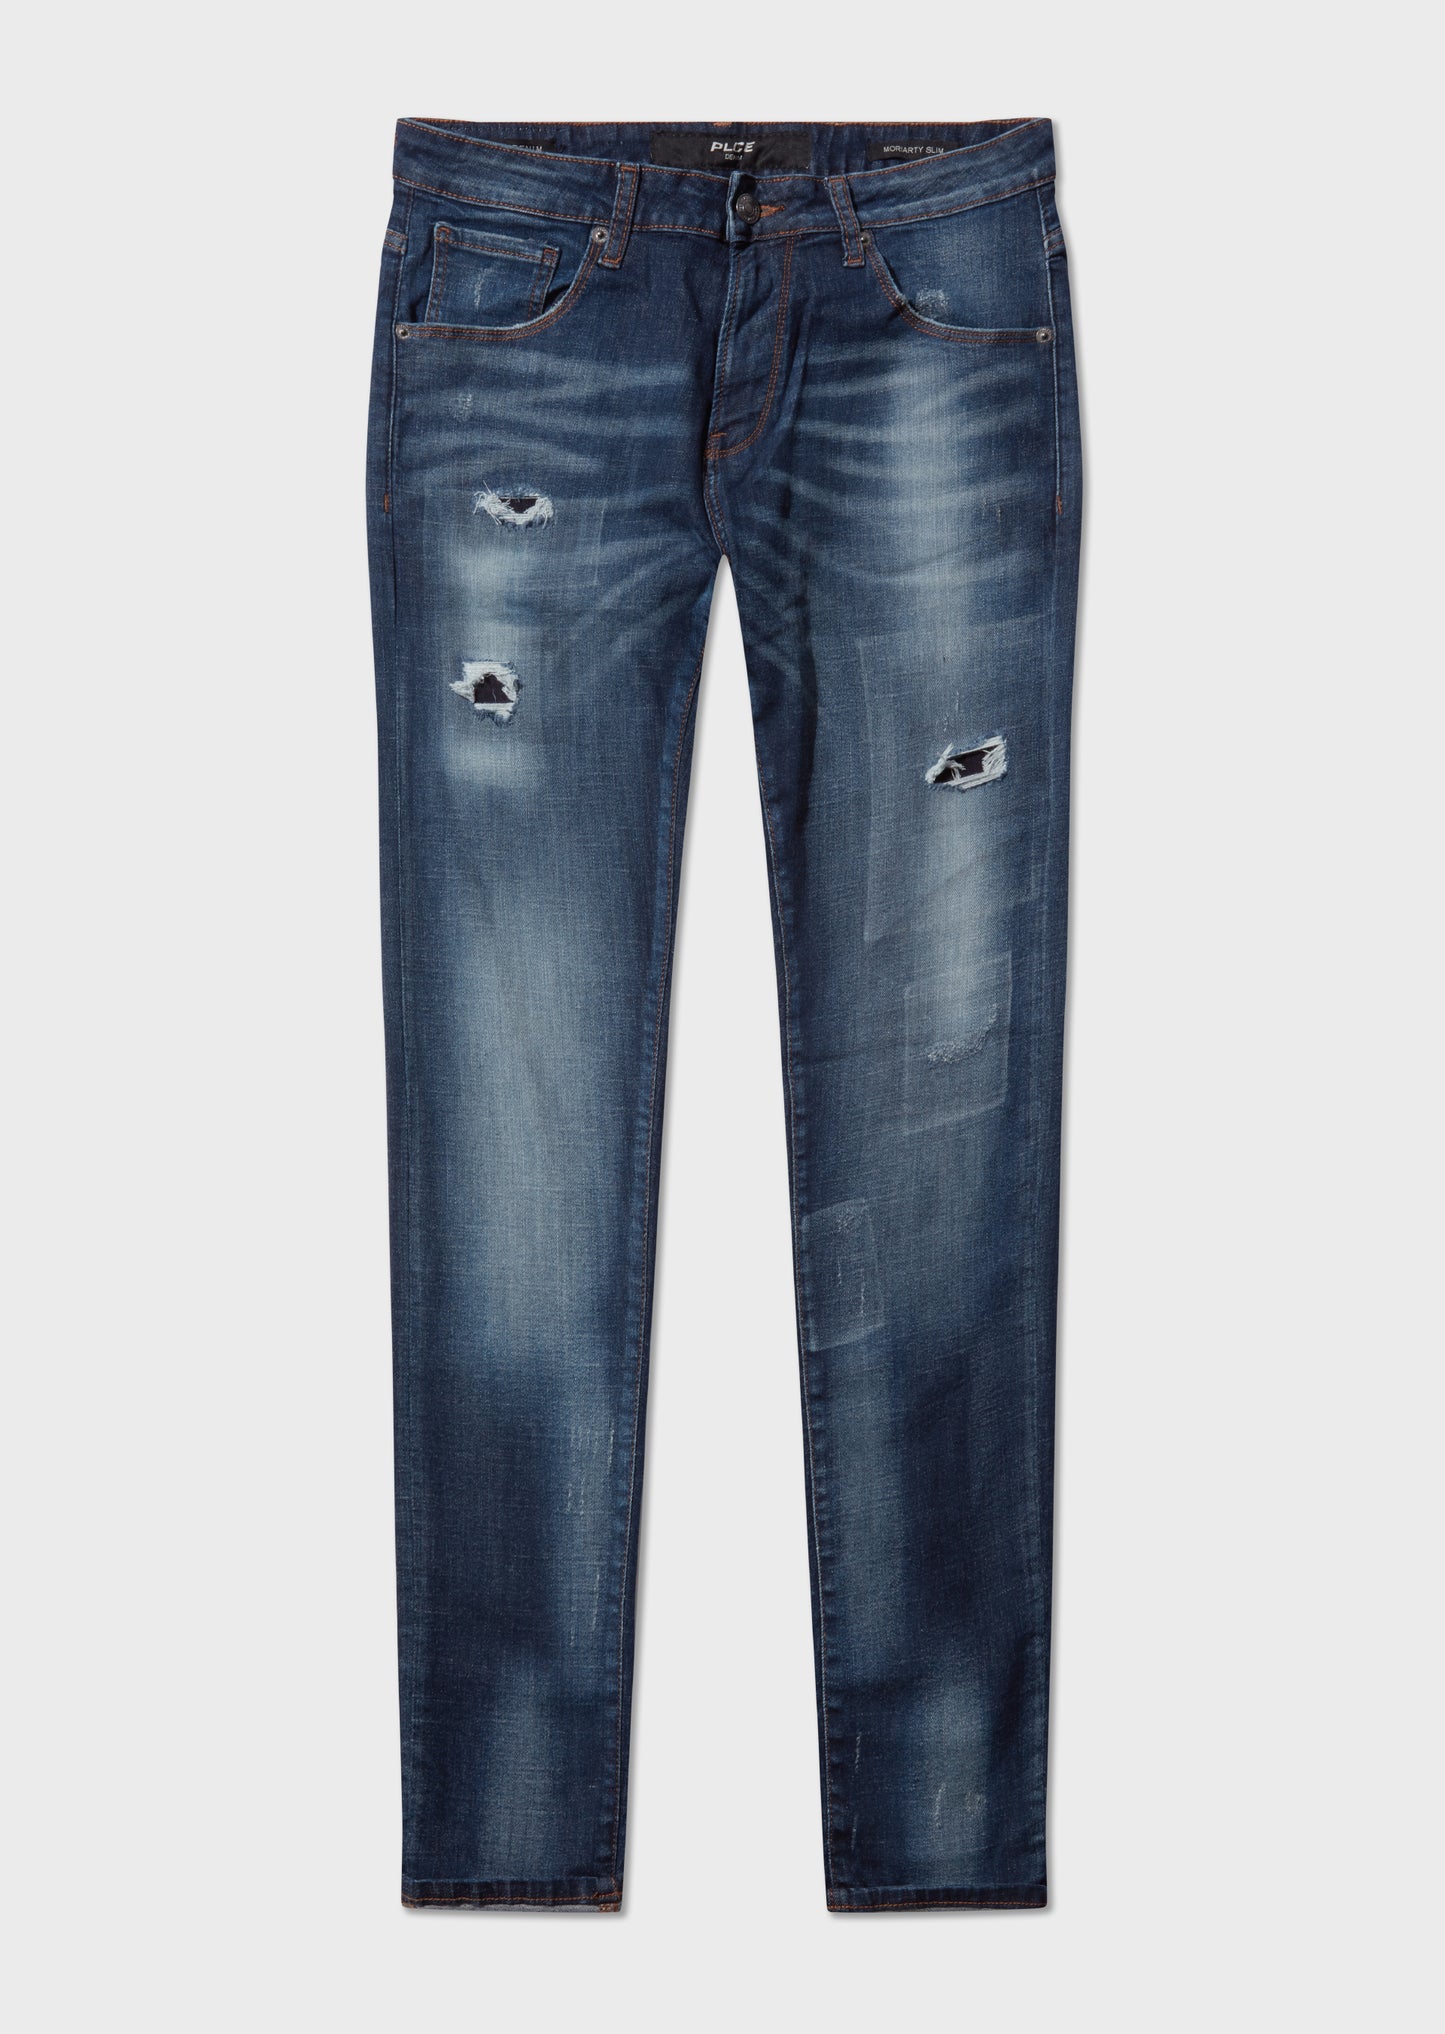 Moriarty COB 866 Slim Fit Jeans